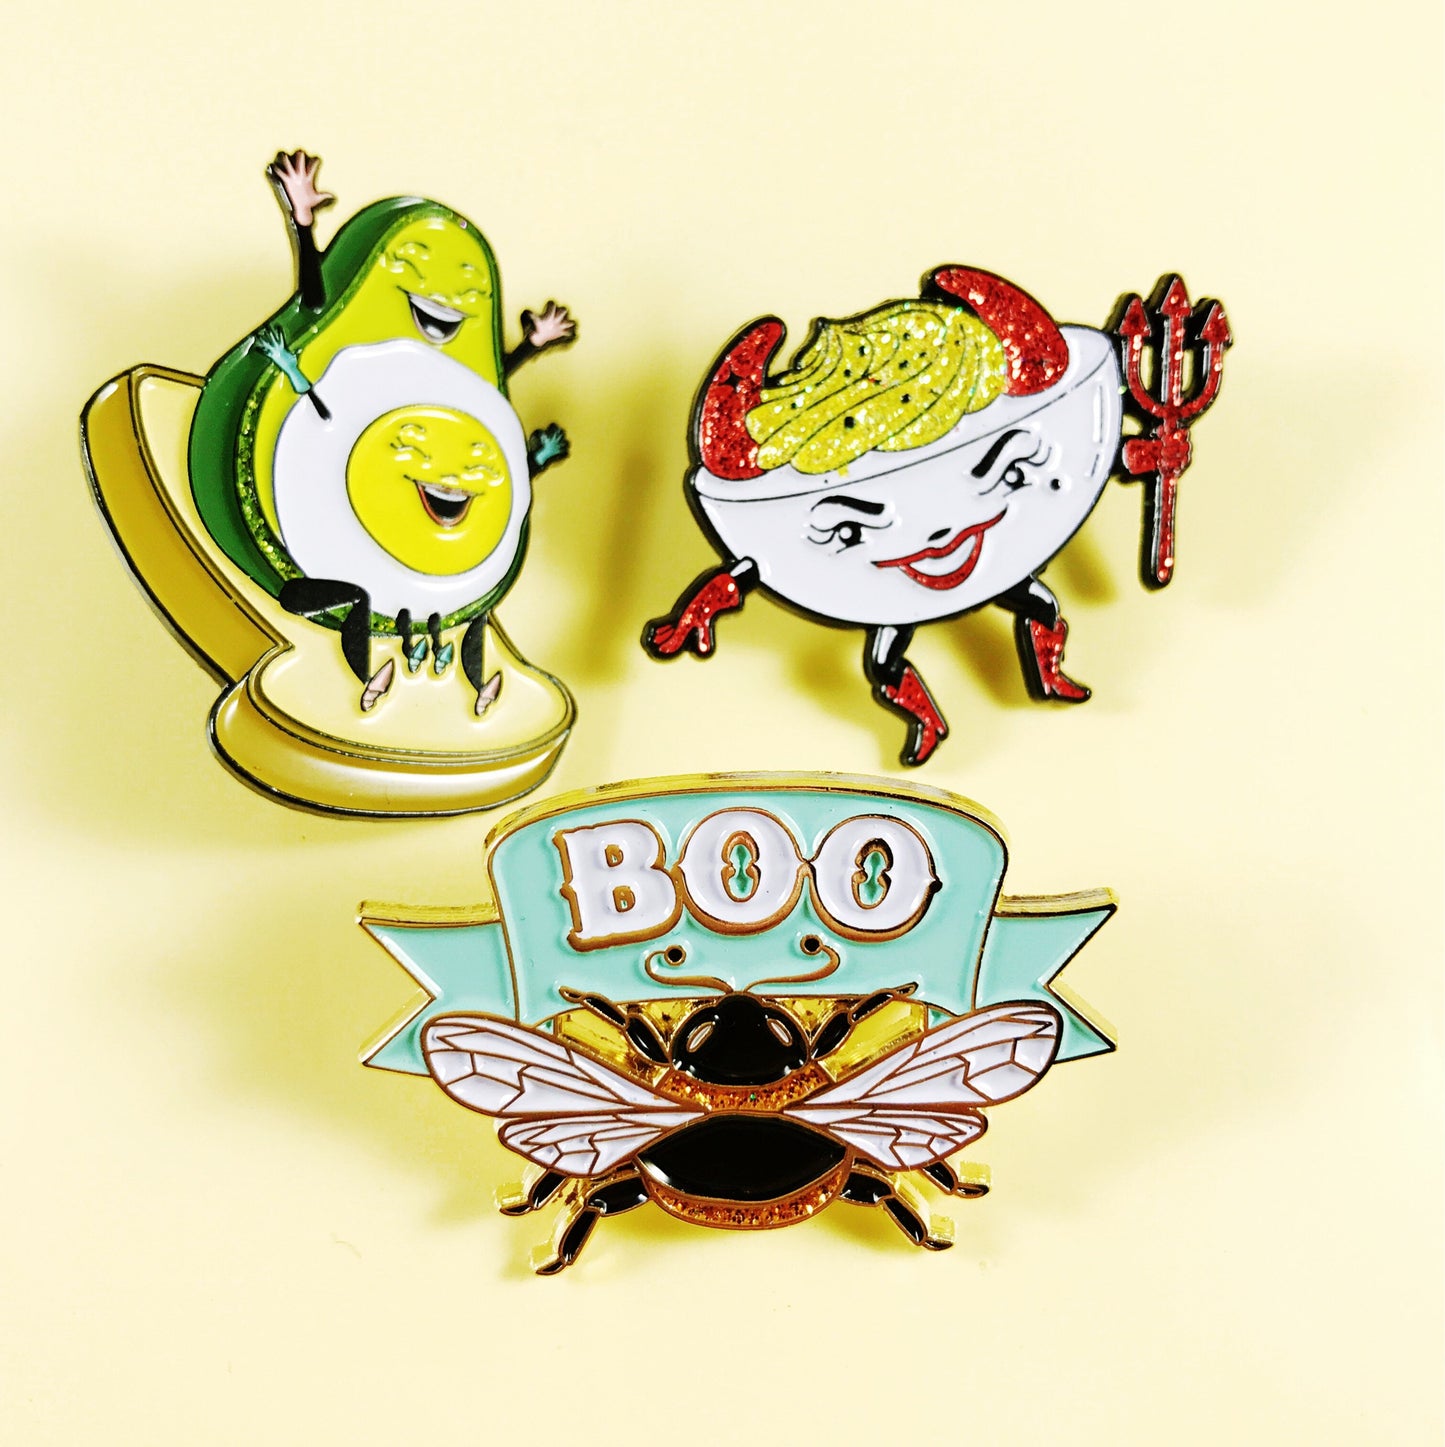 Boo Bee soft enamel pin with glitter highlights!